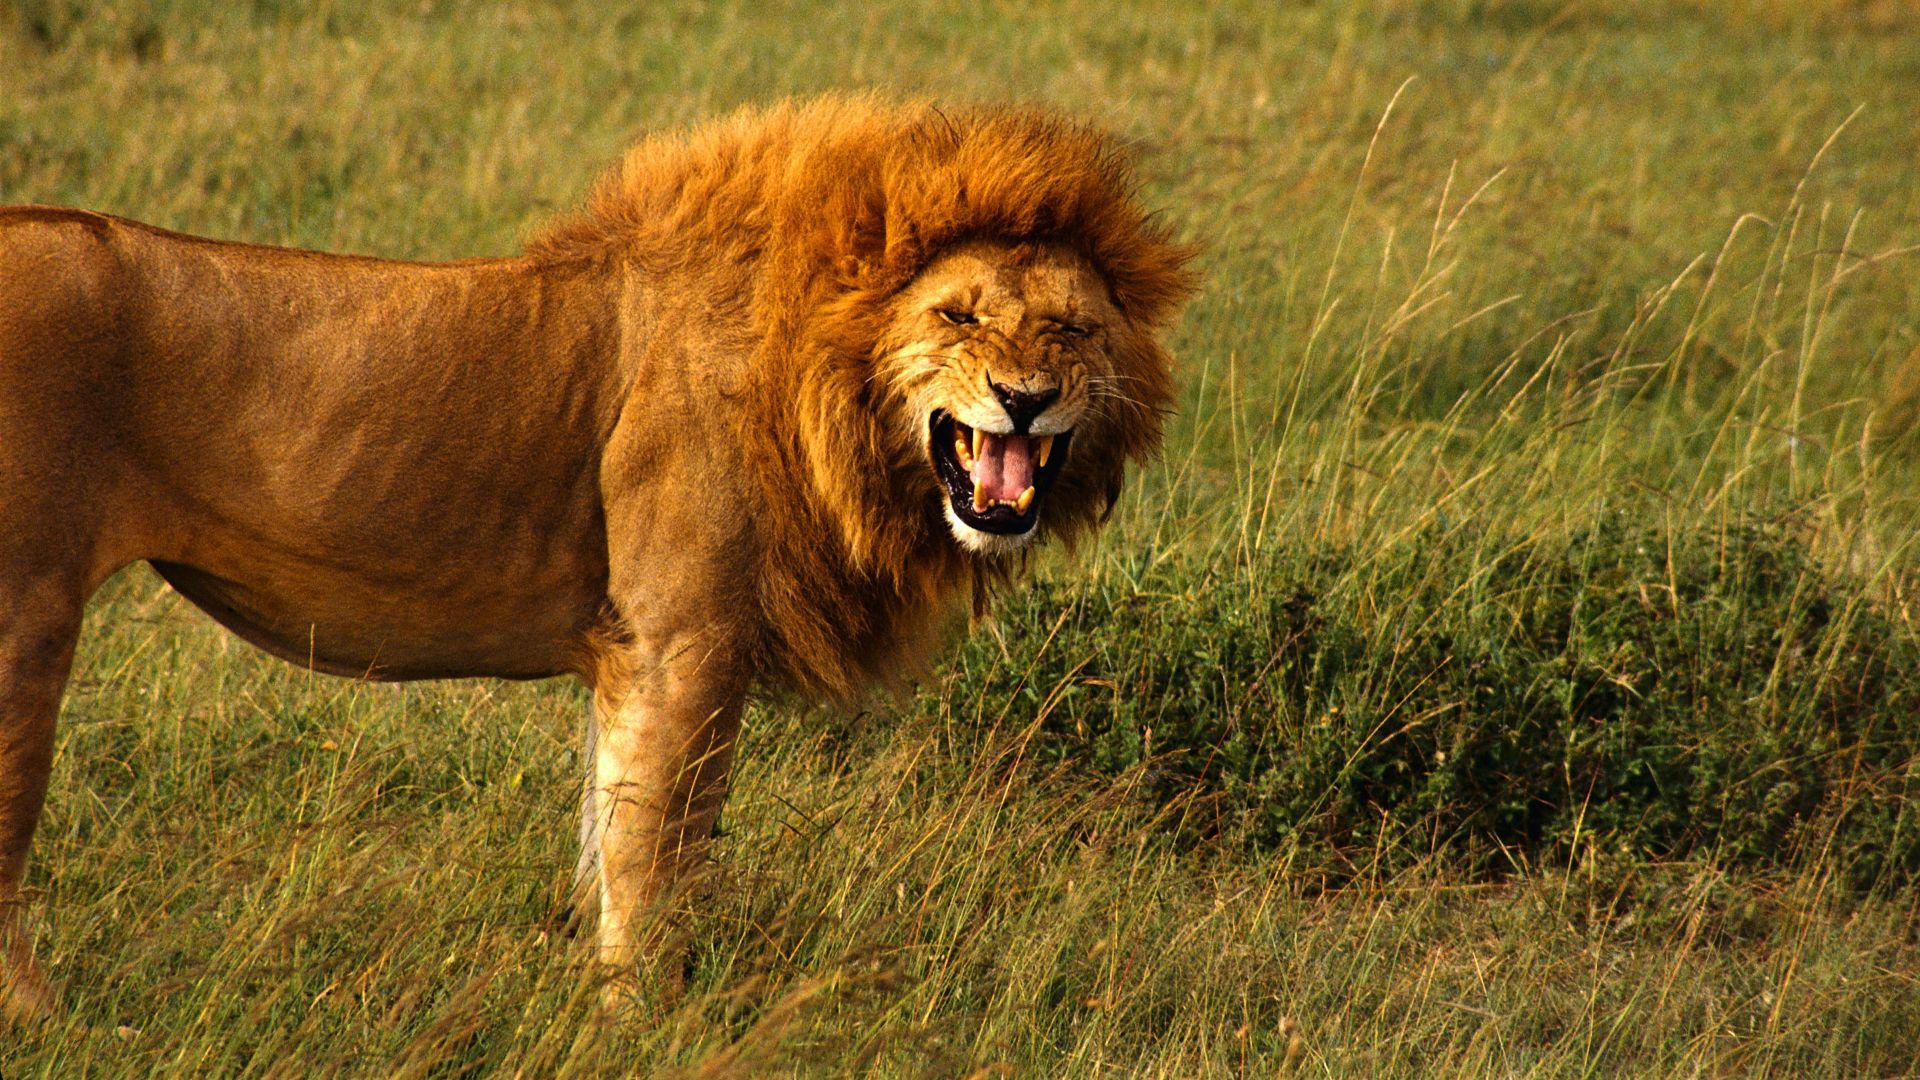 Angry Lion Wallpaper. HD Animals. Nature wallpaper